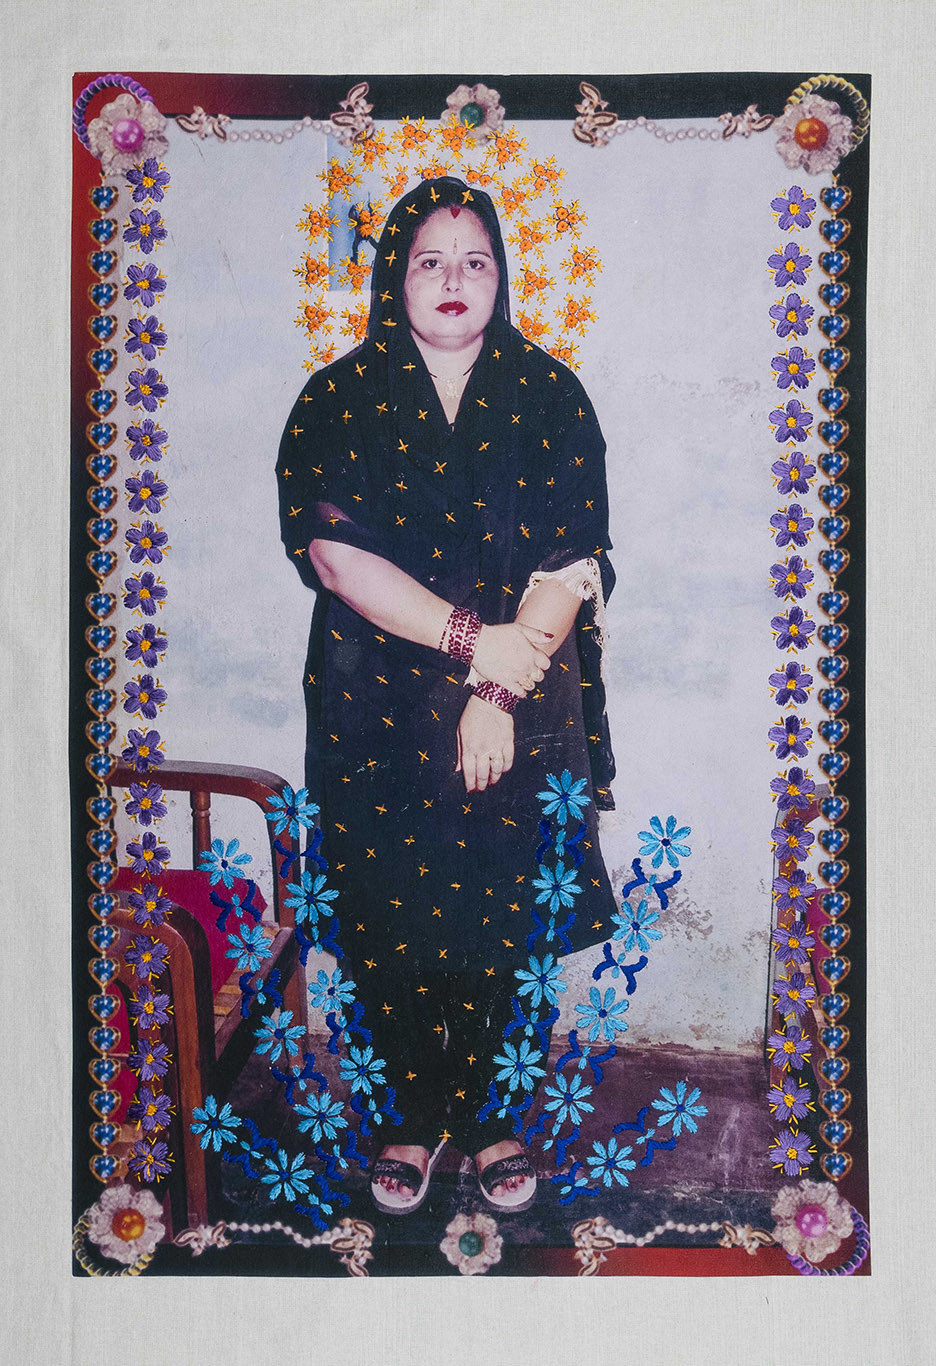 A woman looks directly into the camera, her head covering and the border of the photo are embroidered